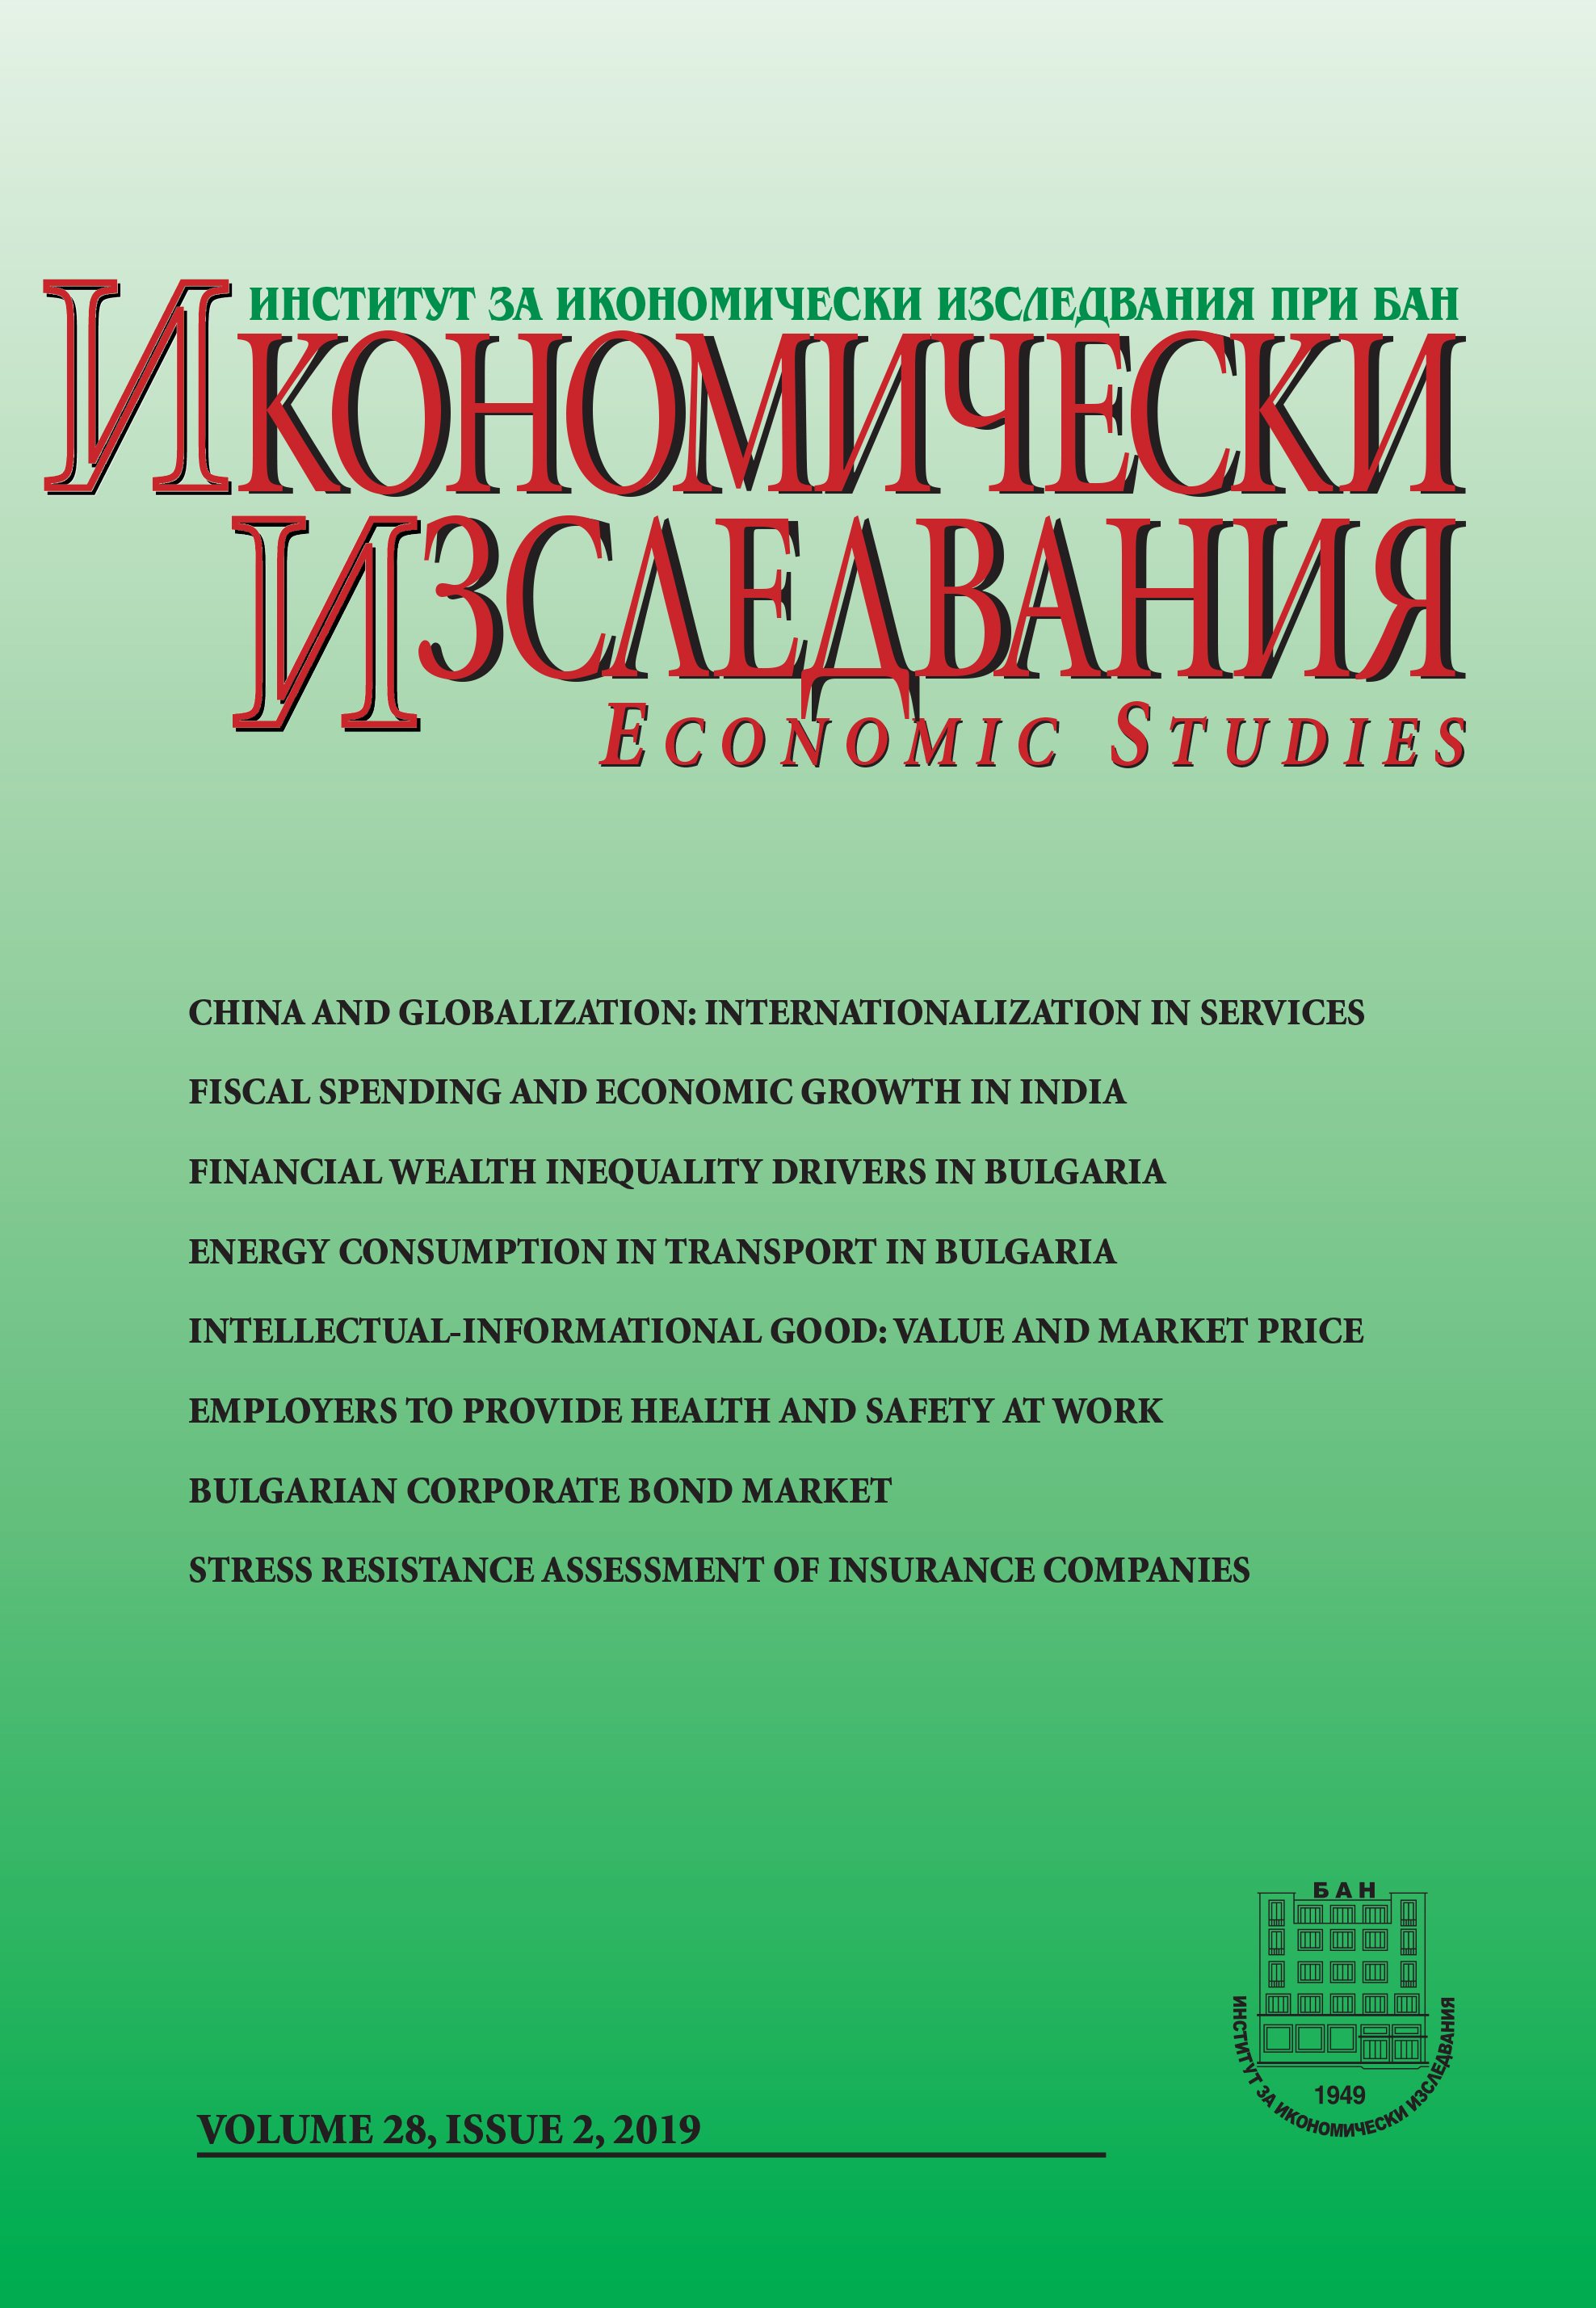 Financial Wealth Inequality Drivers in a Small EU Member Country: An Example from Bulgaria during the Period 2005-2017 Cover Image